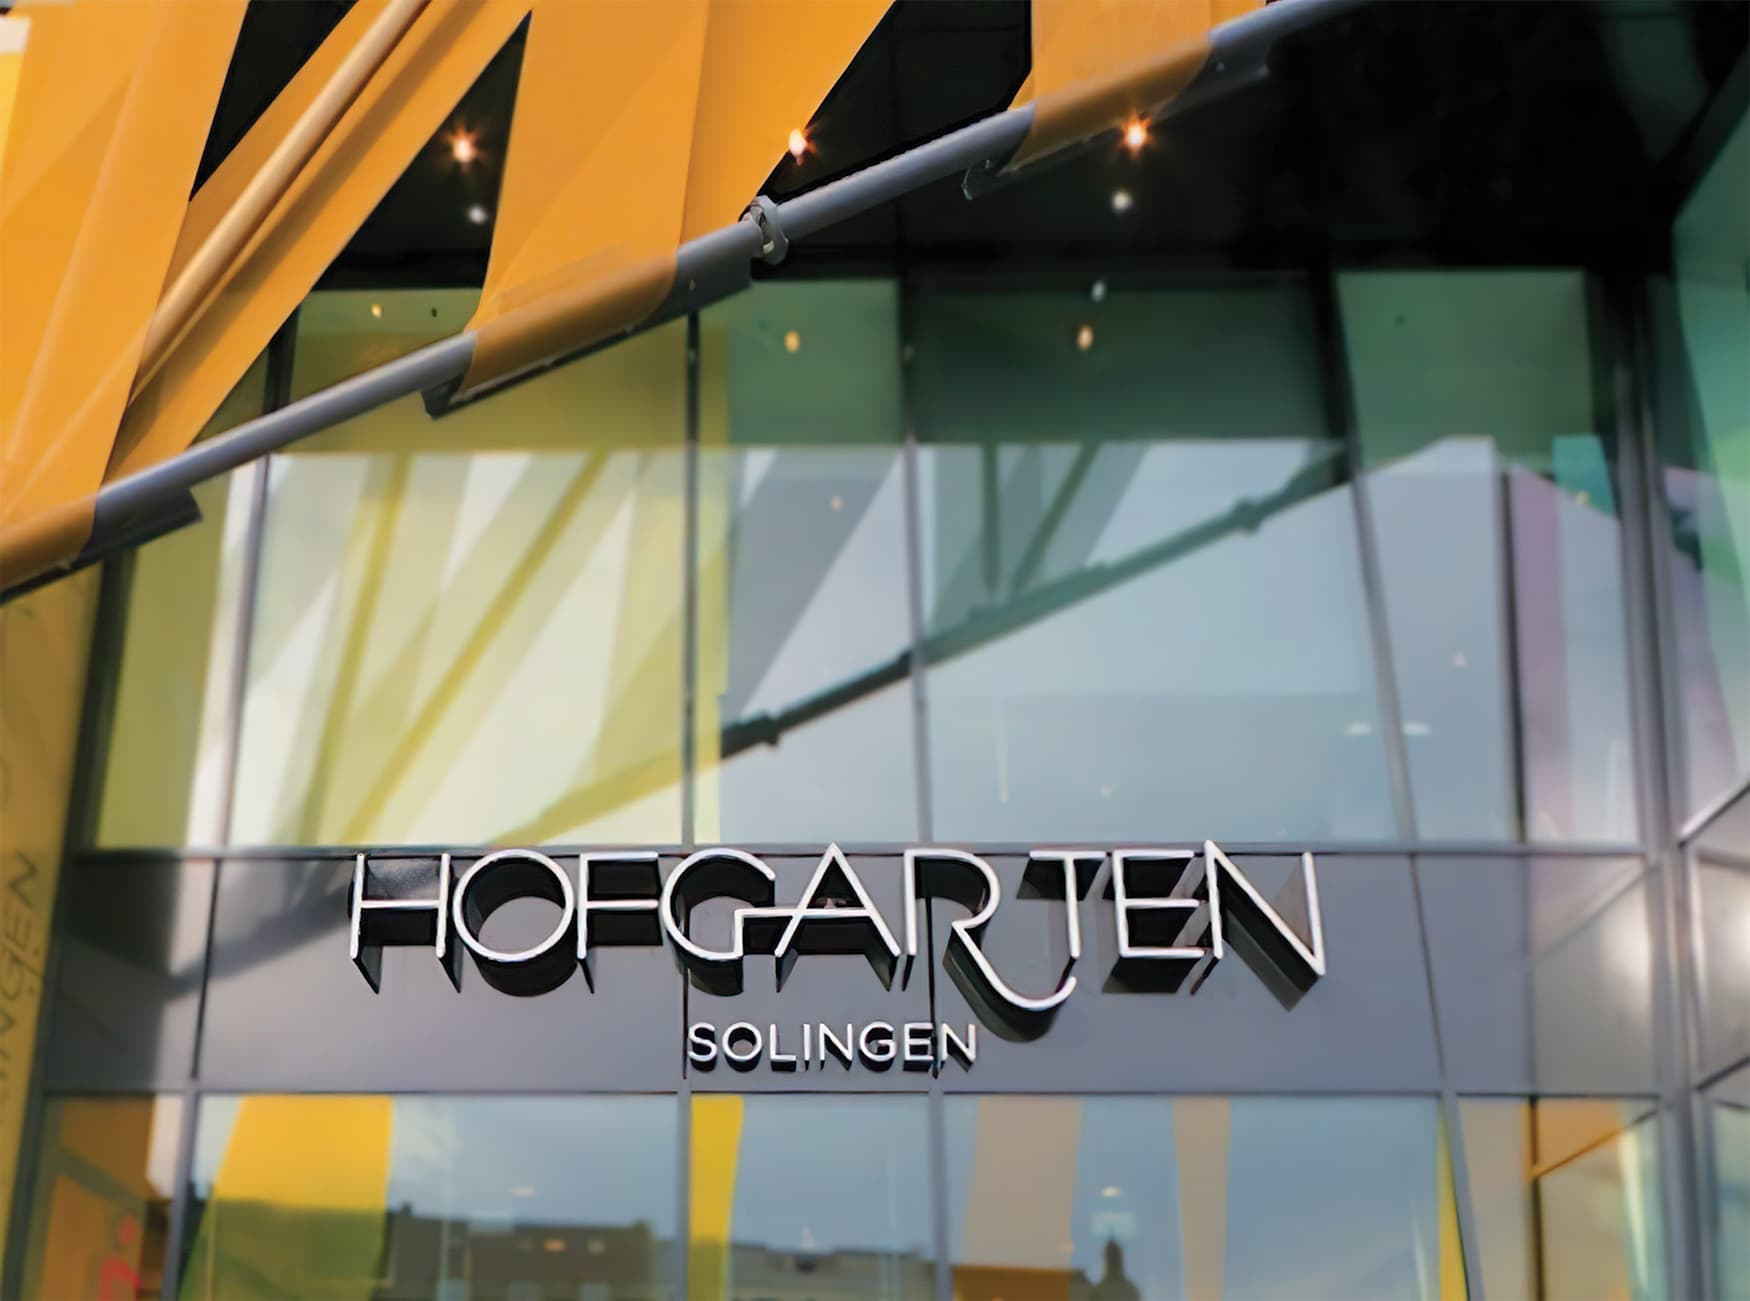 Hofgarten, a retail project in Solingen Germany, project identity illuminated signage design.